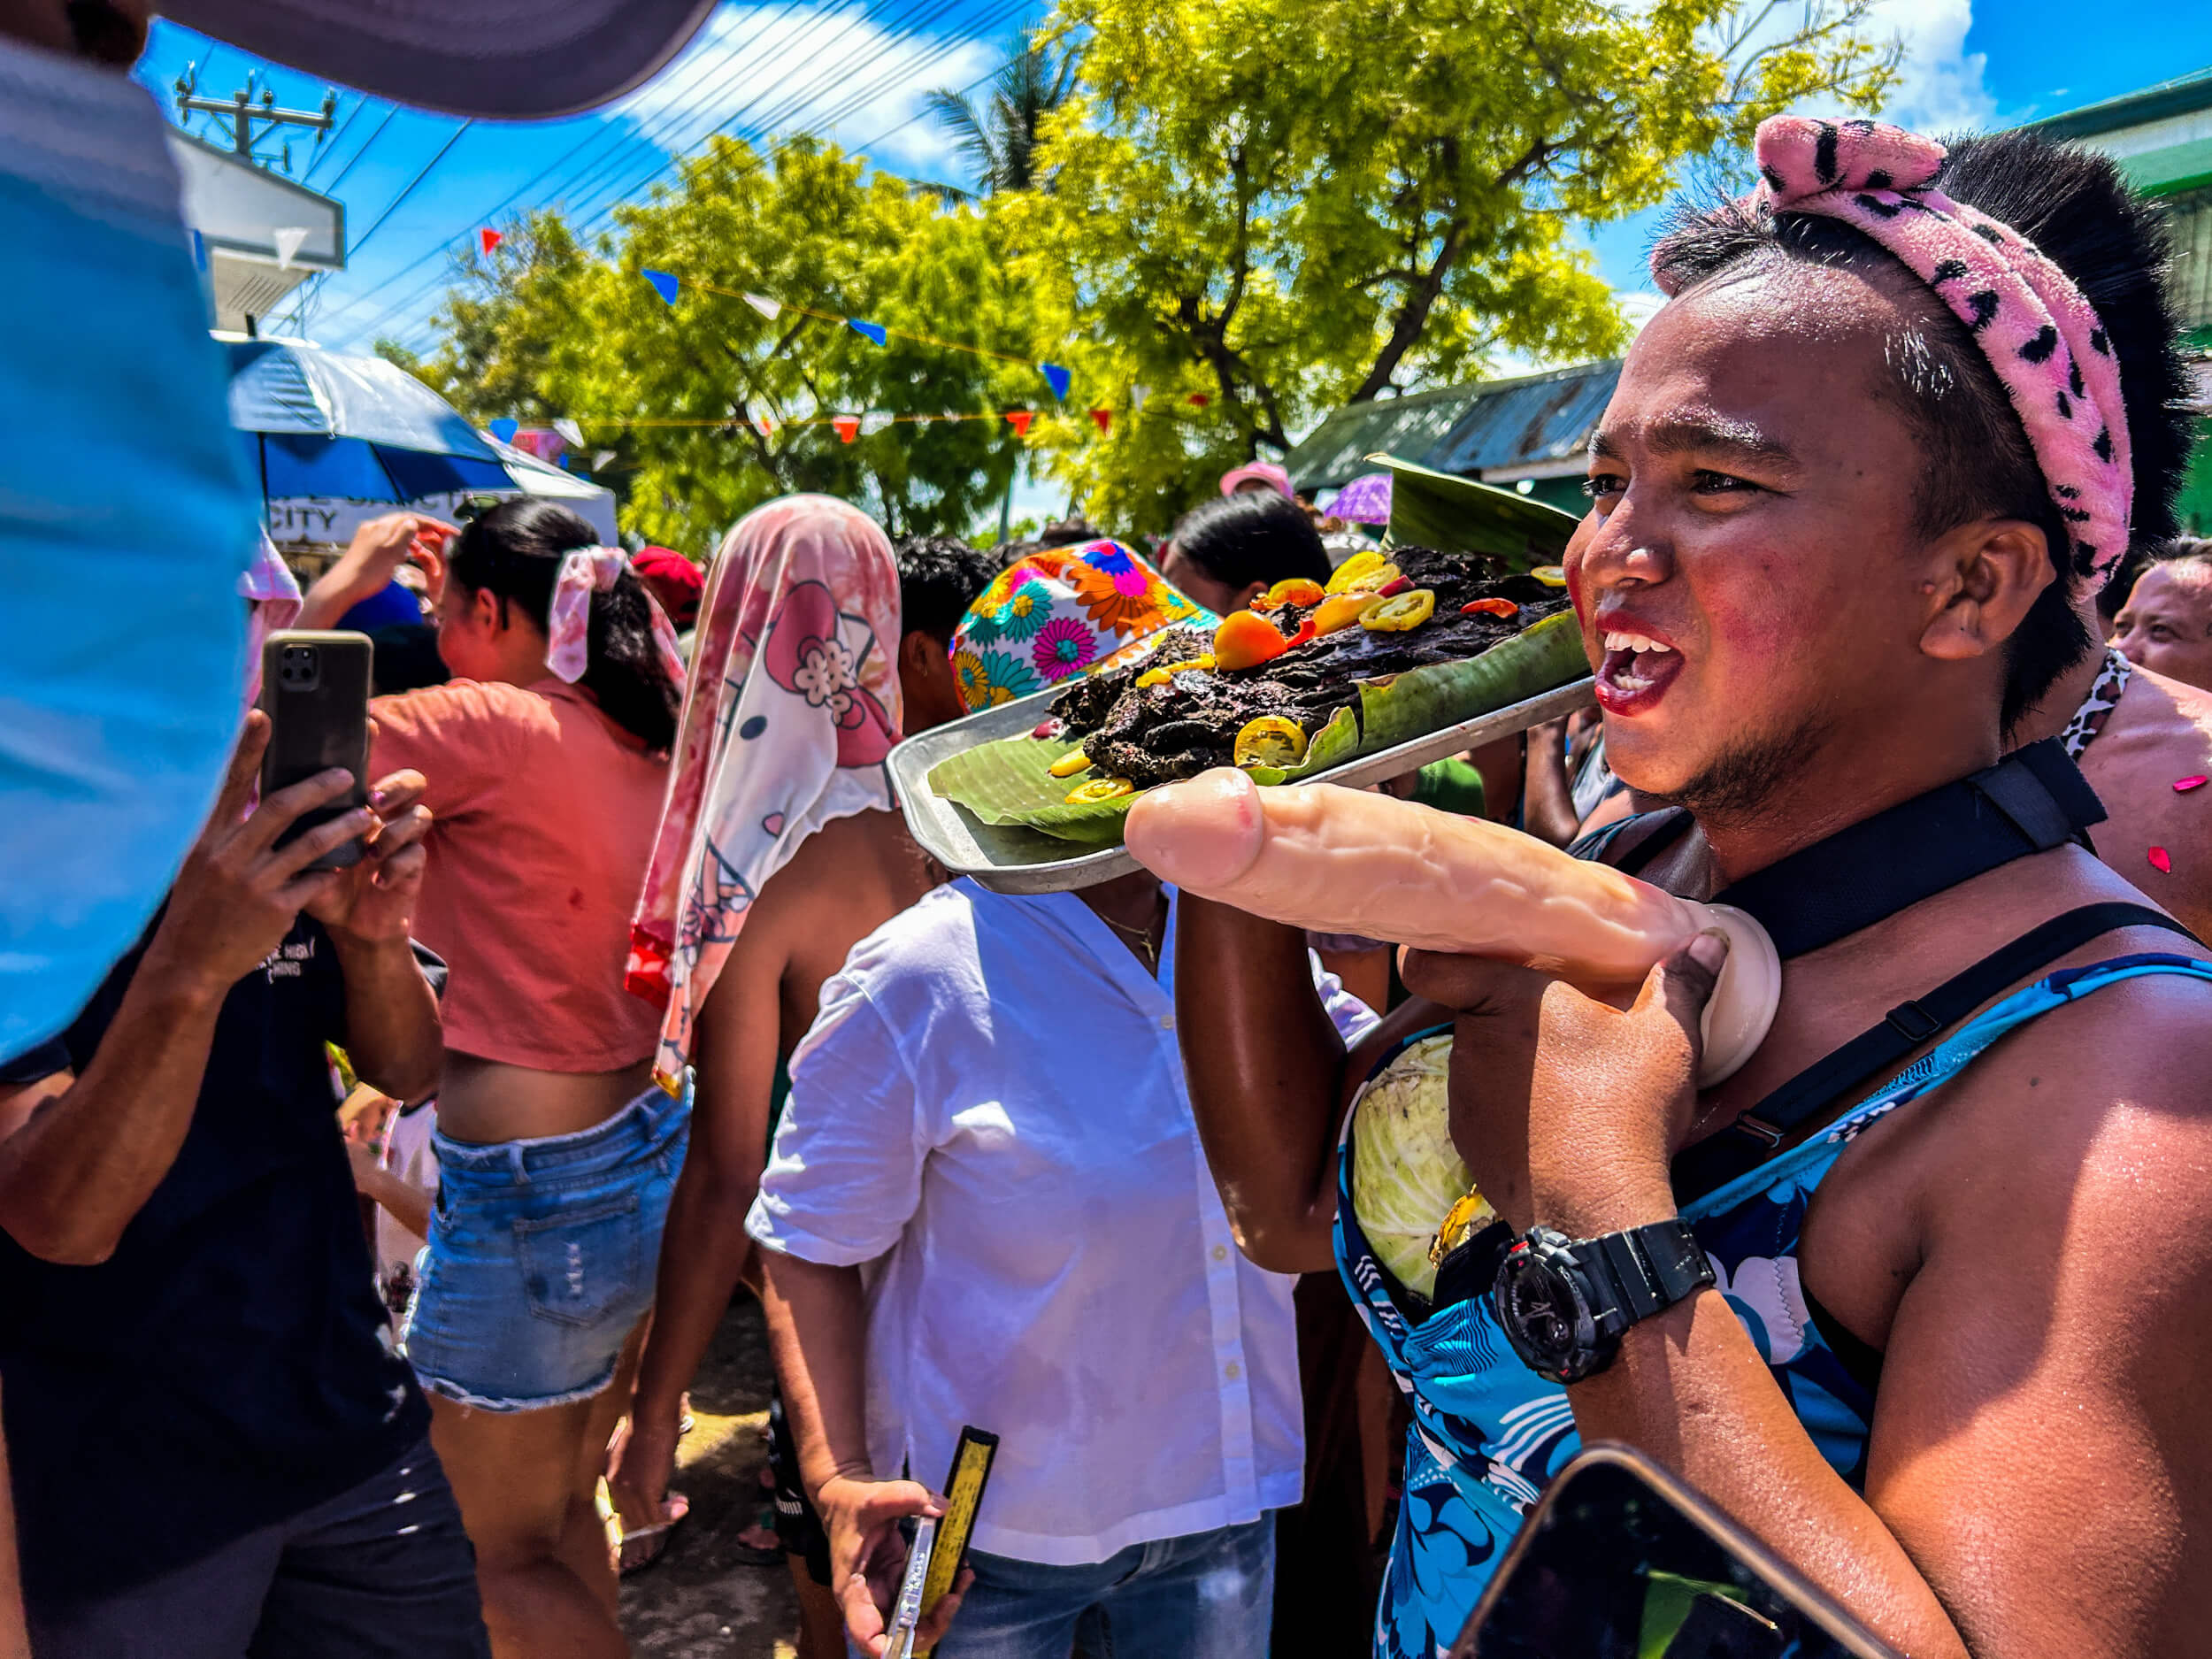 NO LONGER ALLOWED,. Revelers will no longer be allowed to carry around dildos and trays of cow manure sold as "food" on Sunday's Baliw-Baliw Festival.